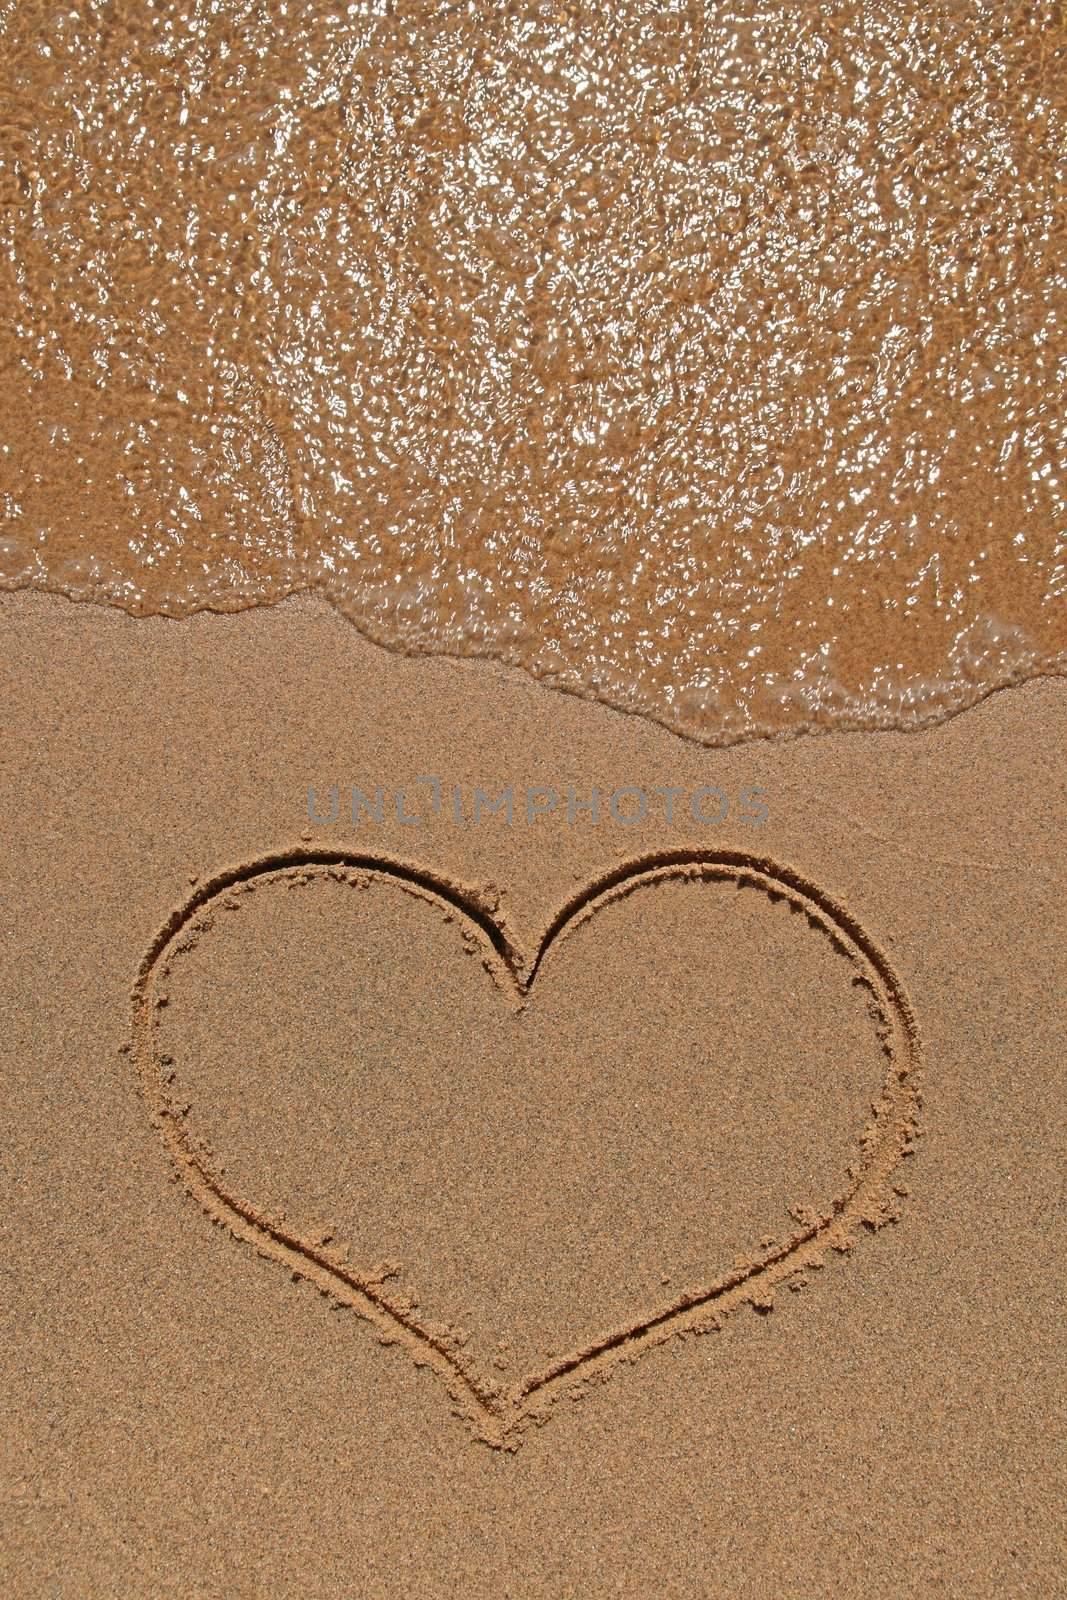 Wave running over the sand beach with heart drawing.